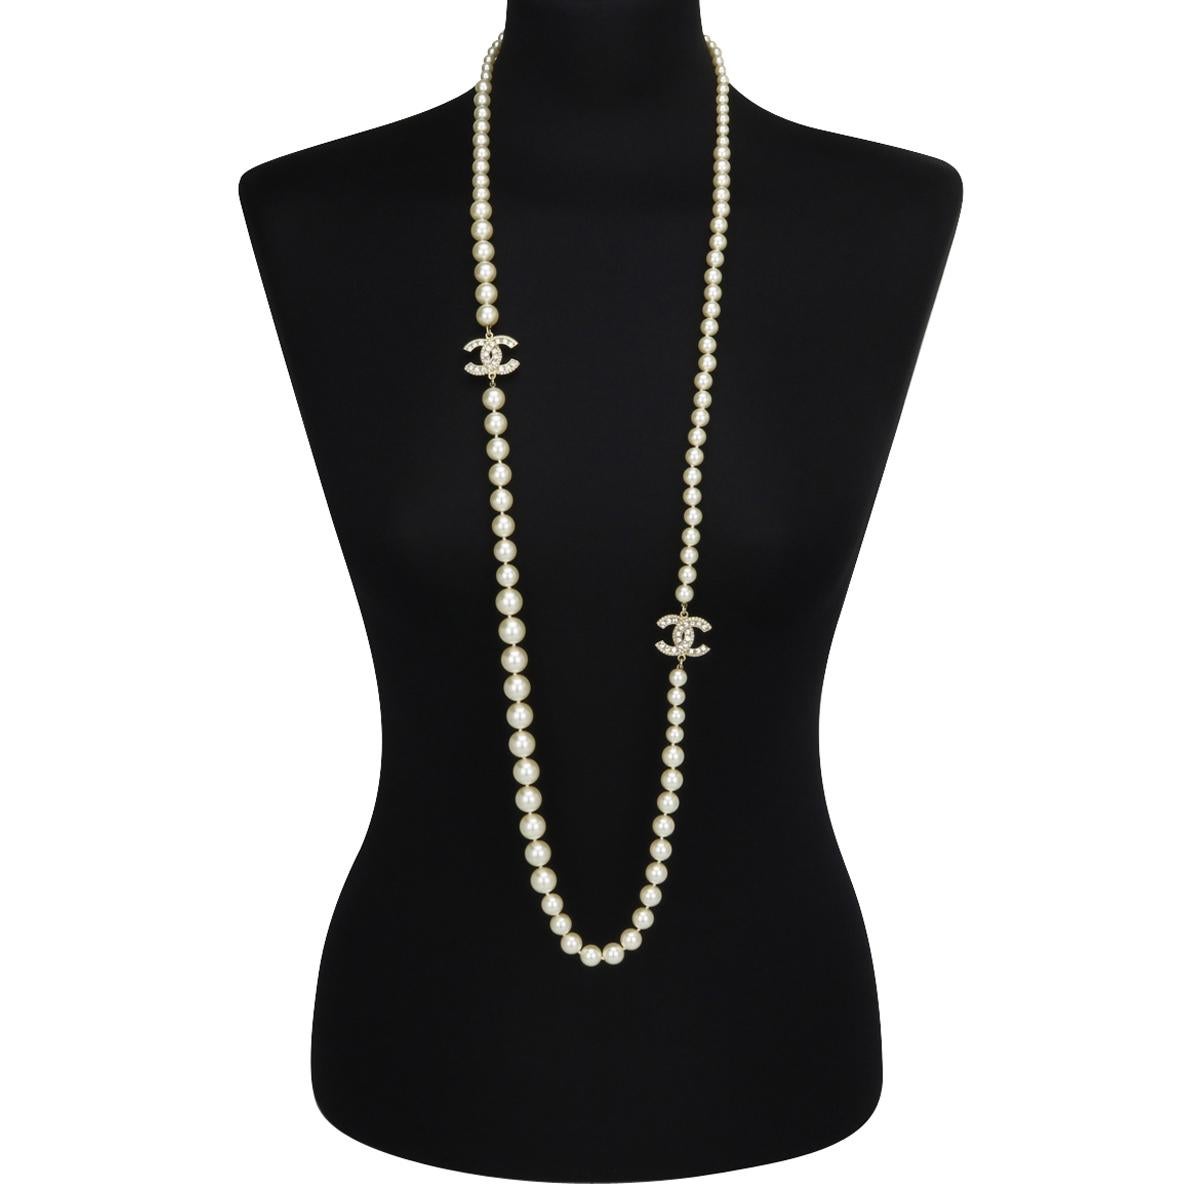 Authentic CHANEL CC Faux Pearl Crystal Gold Long Necklace 2016 (A16 V).

This stunning long necklace is in immaculate condition.

It is made of exquisite various-sized baroque pearl beads, with large interlocking CCs pendants with crystal stones on